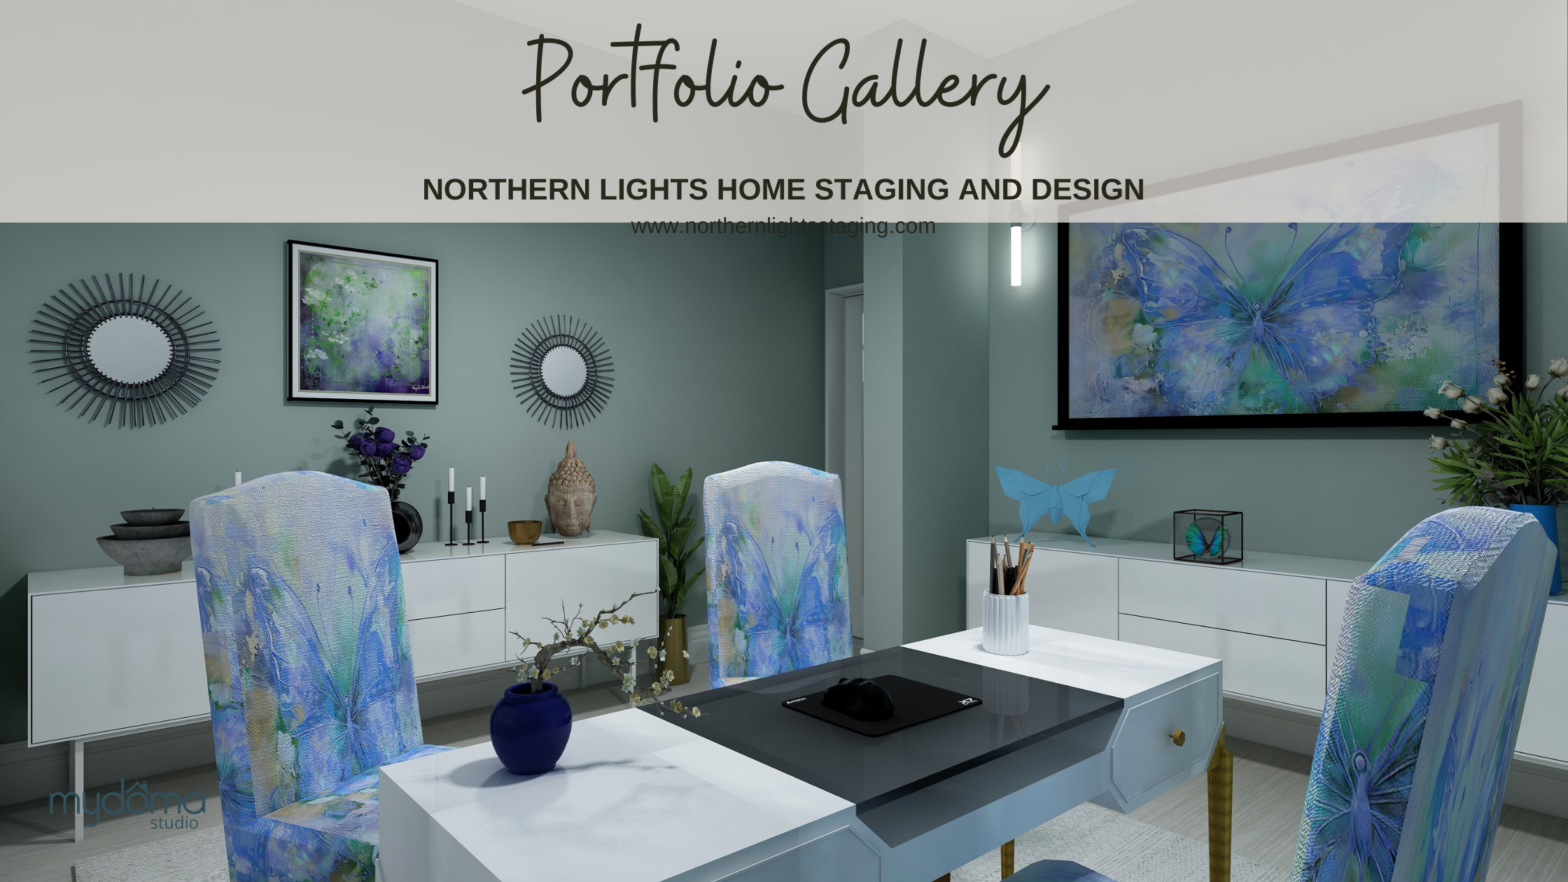 Portfolio Gallery of Northern Lights Home Staging and Design